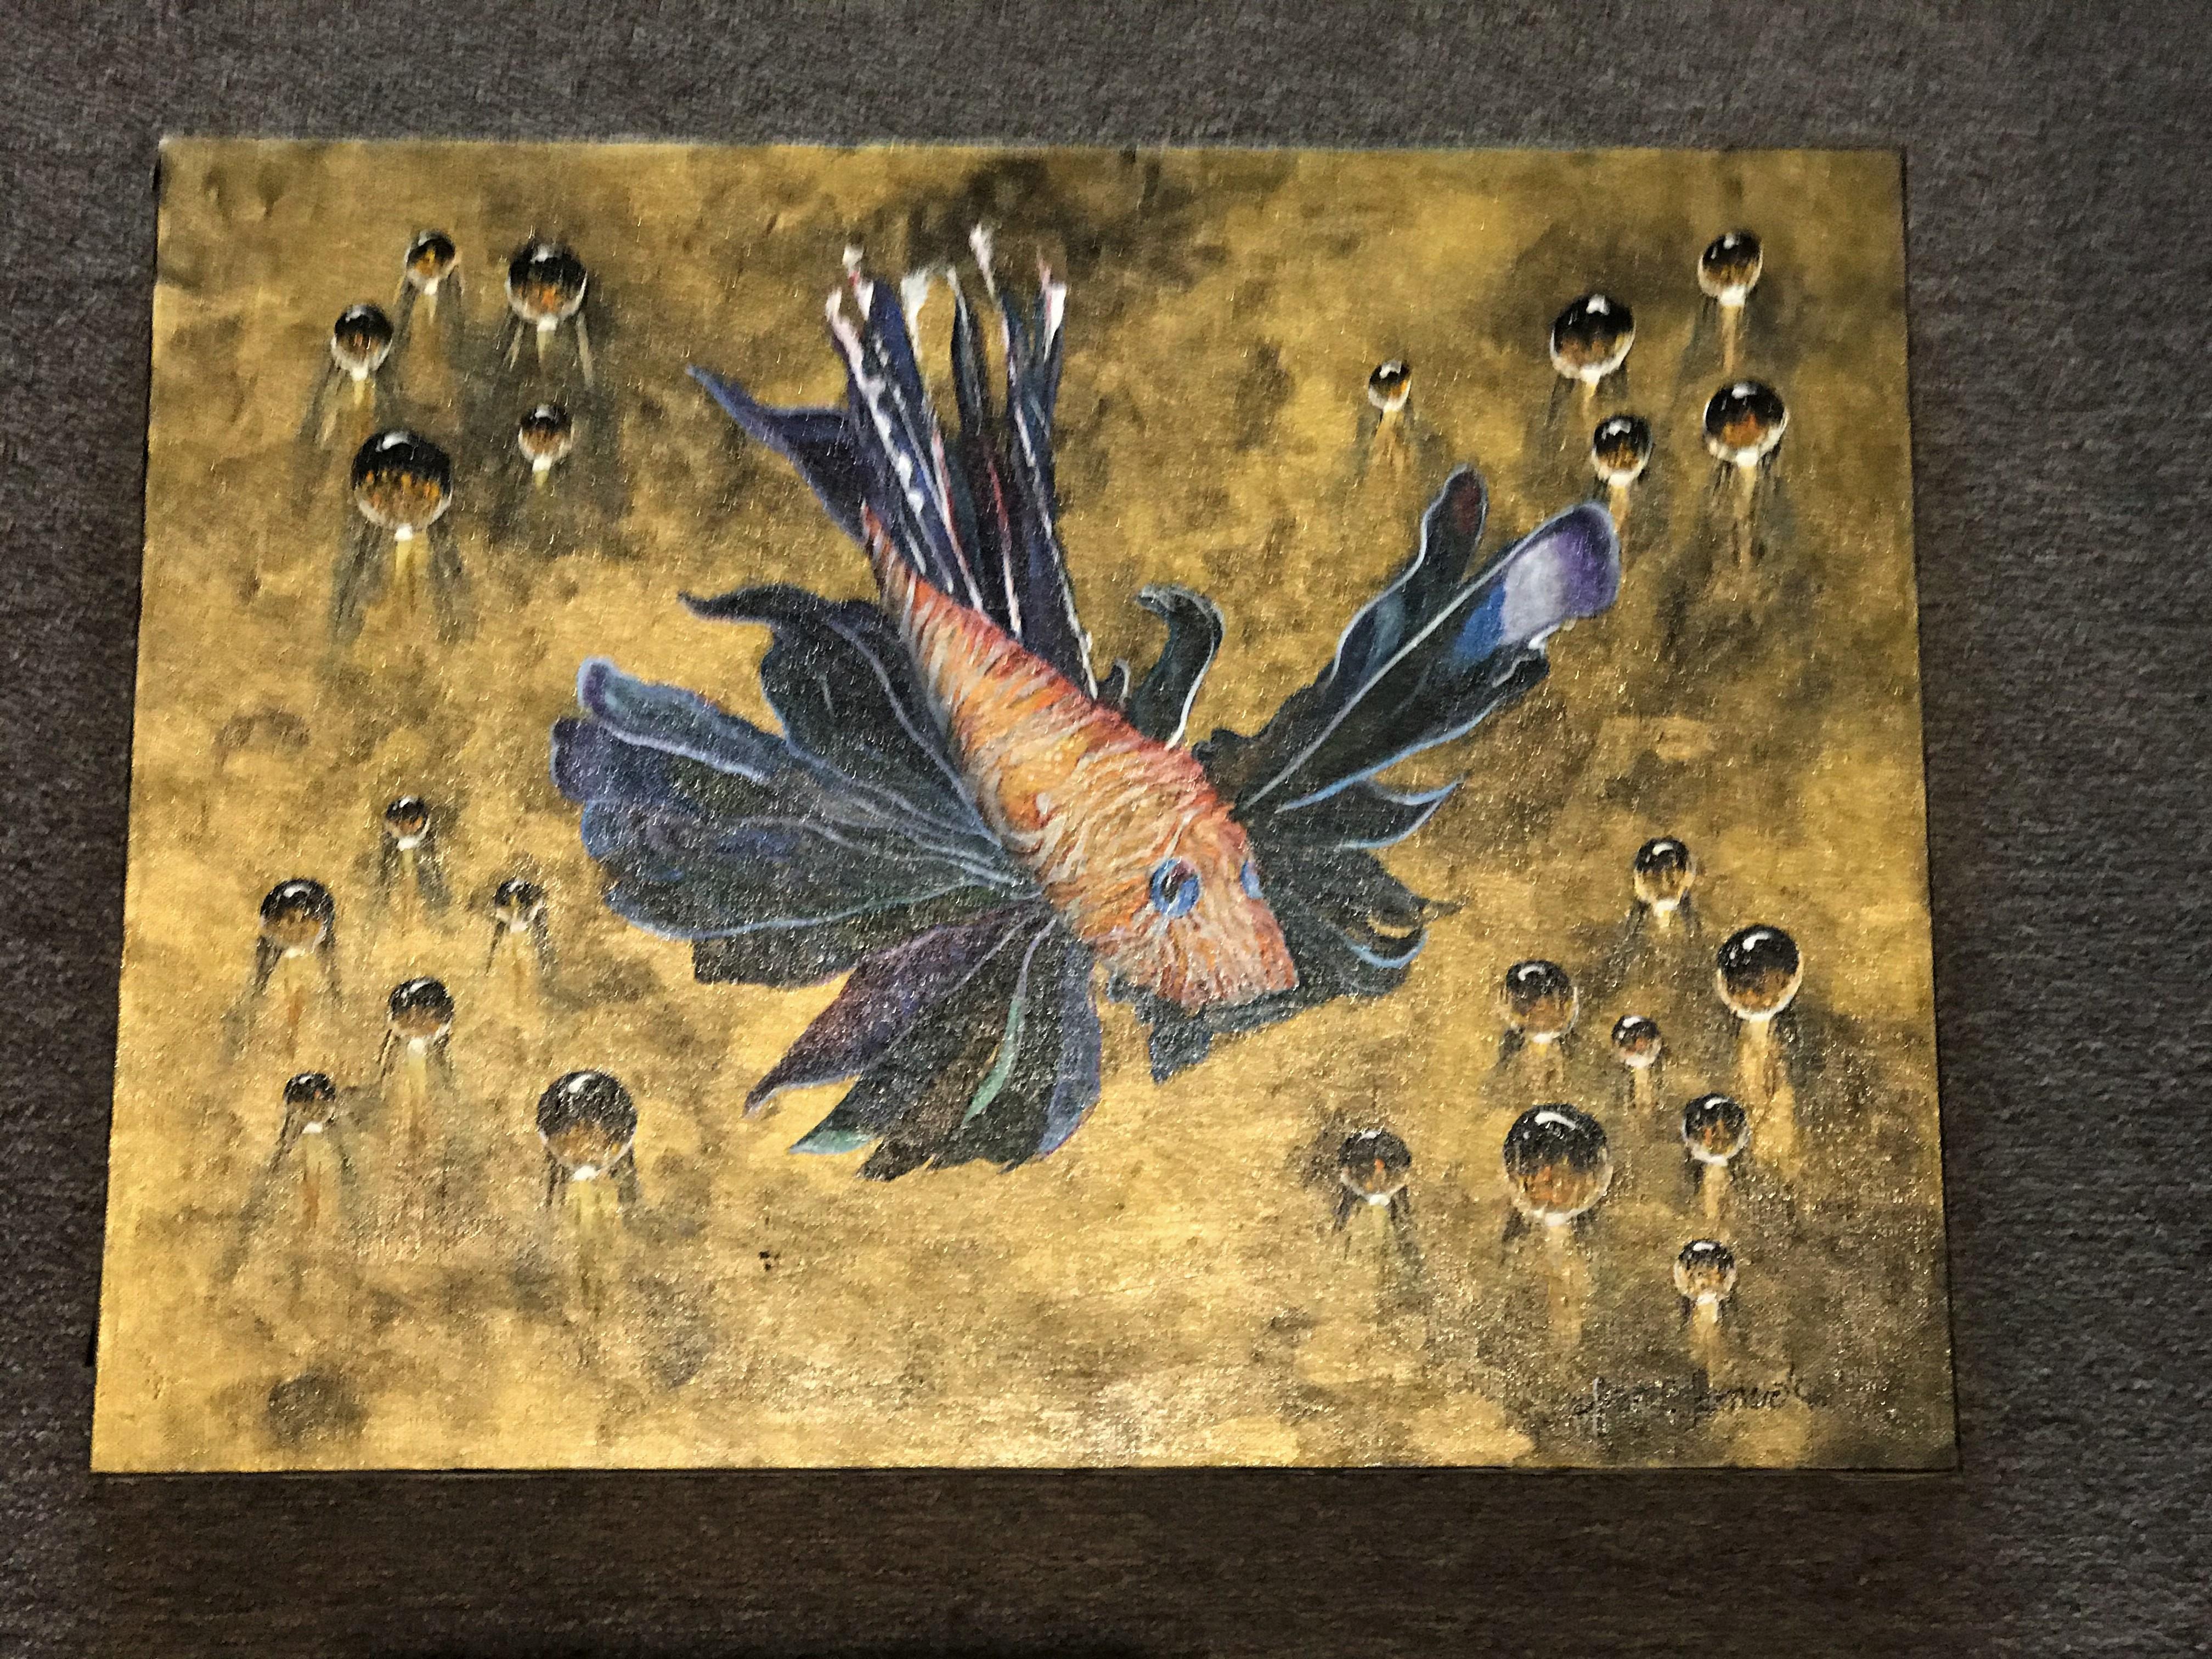 REDUCED FROM $ 190...The invasive Tiger Fish, now quite evident in the Keys and the Caribbean, here a signed 1996 Oil on Canvas by Fran C. Romero depicting a beautiful colorful Tiger Fish with surrealistic Bubbles, like jellyfish rising in an